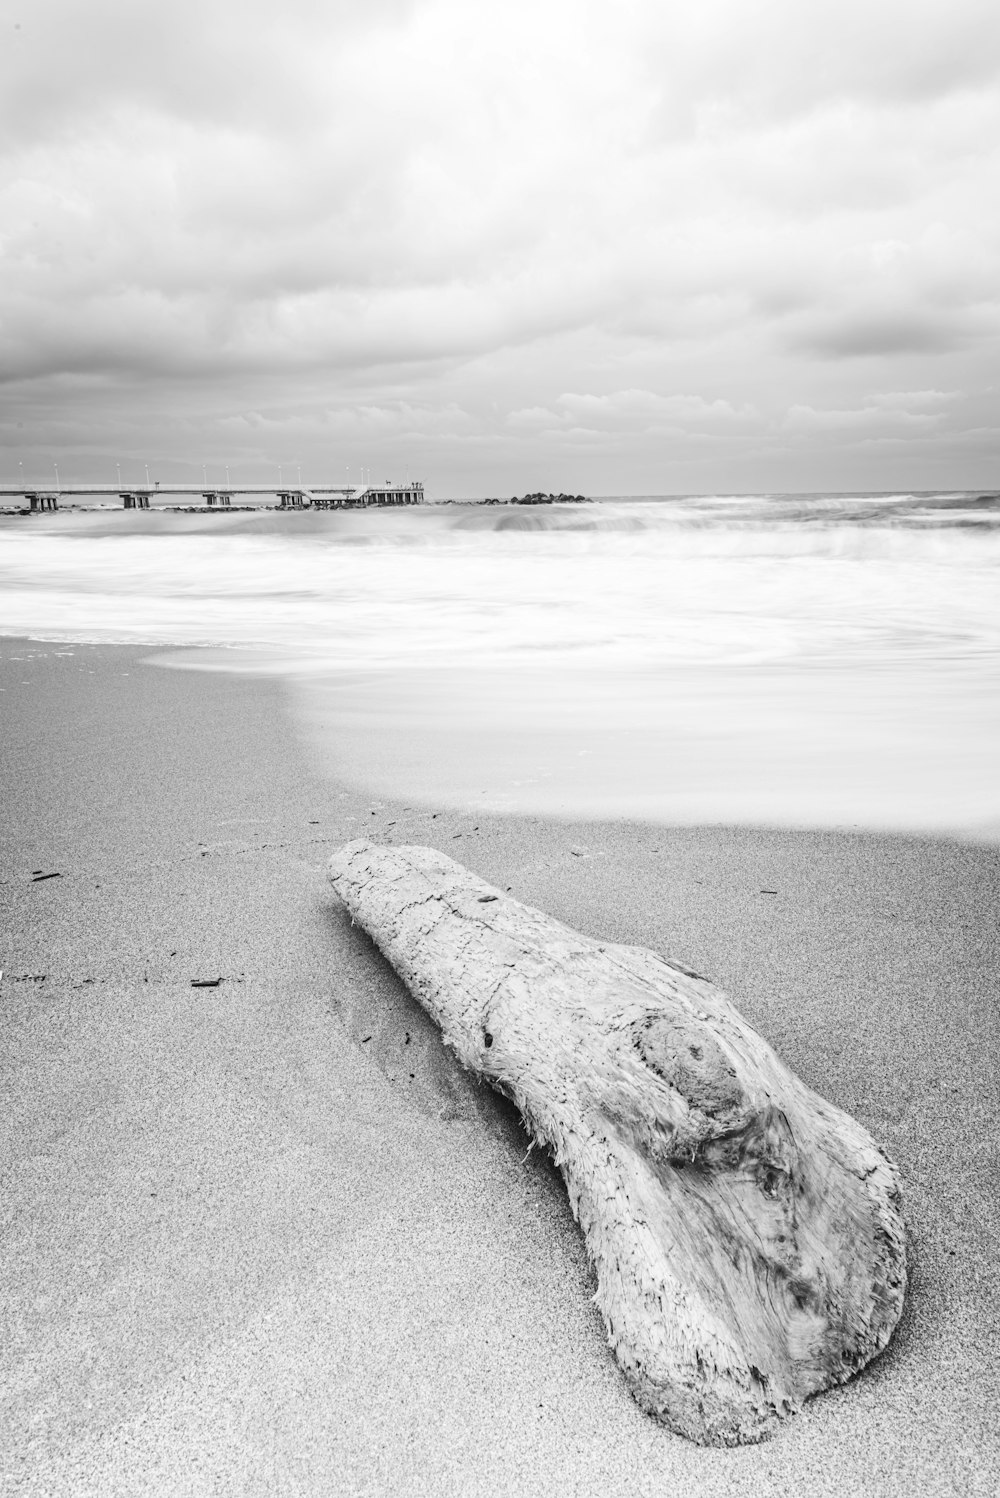 a log laying on a beach next to the ocean